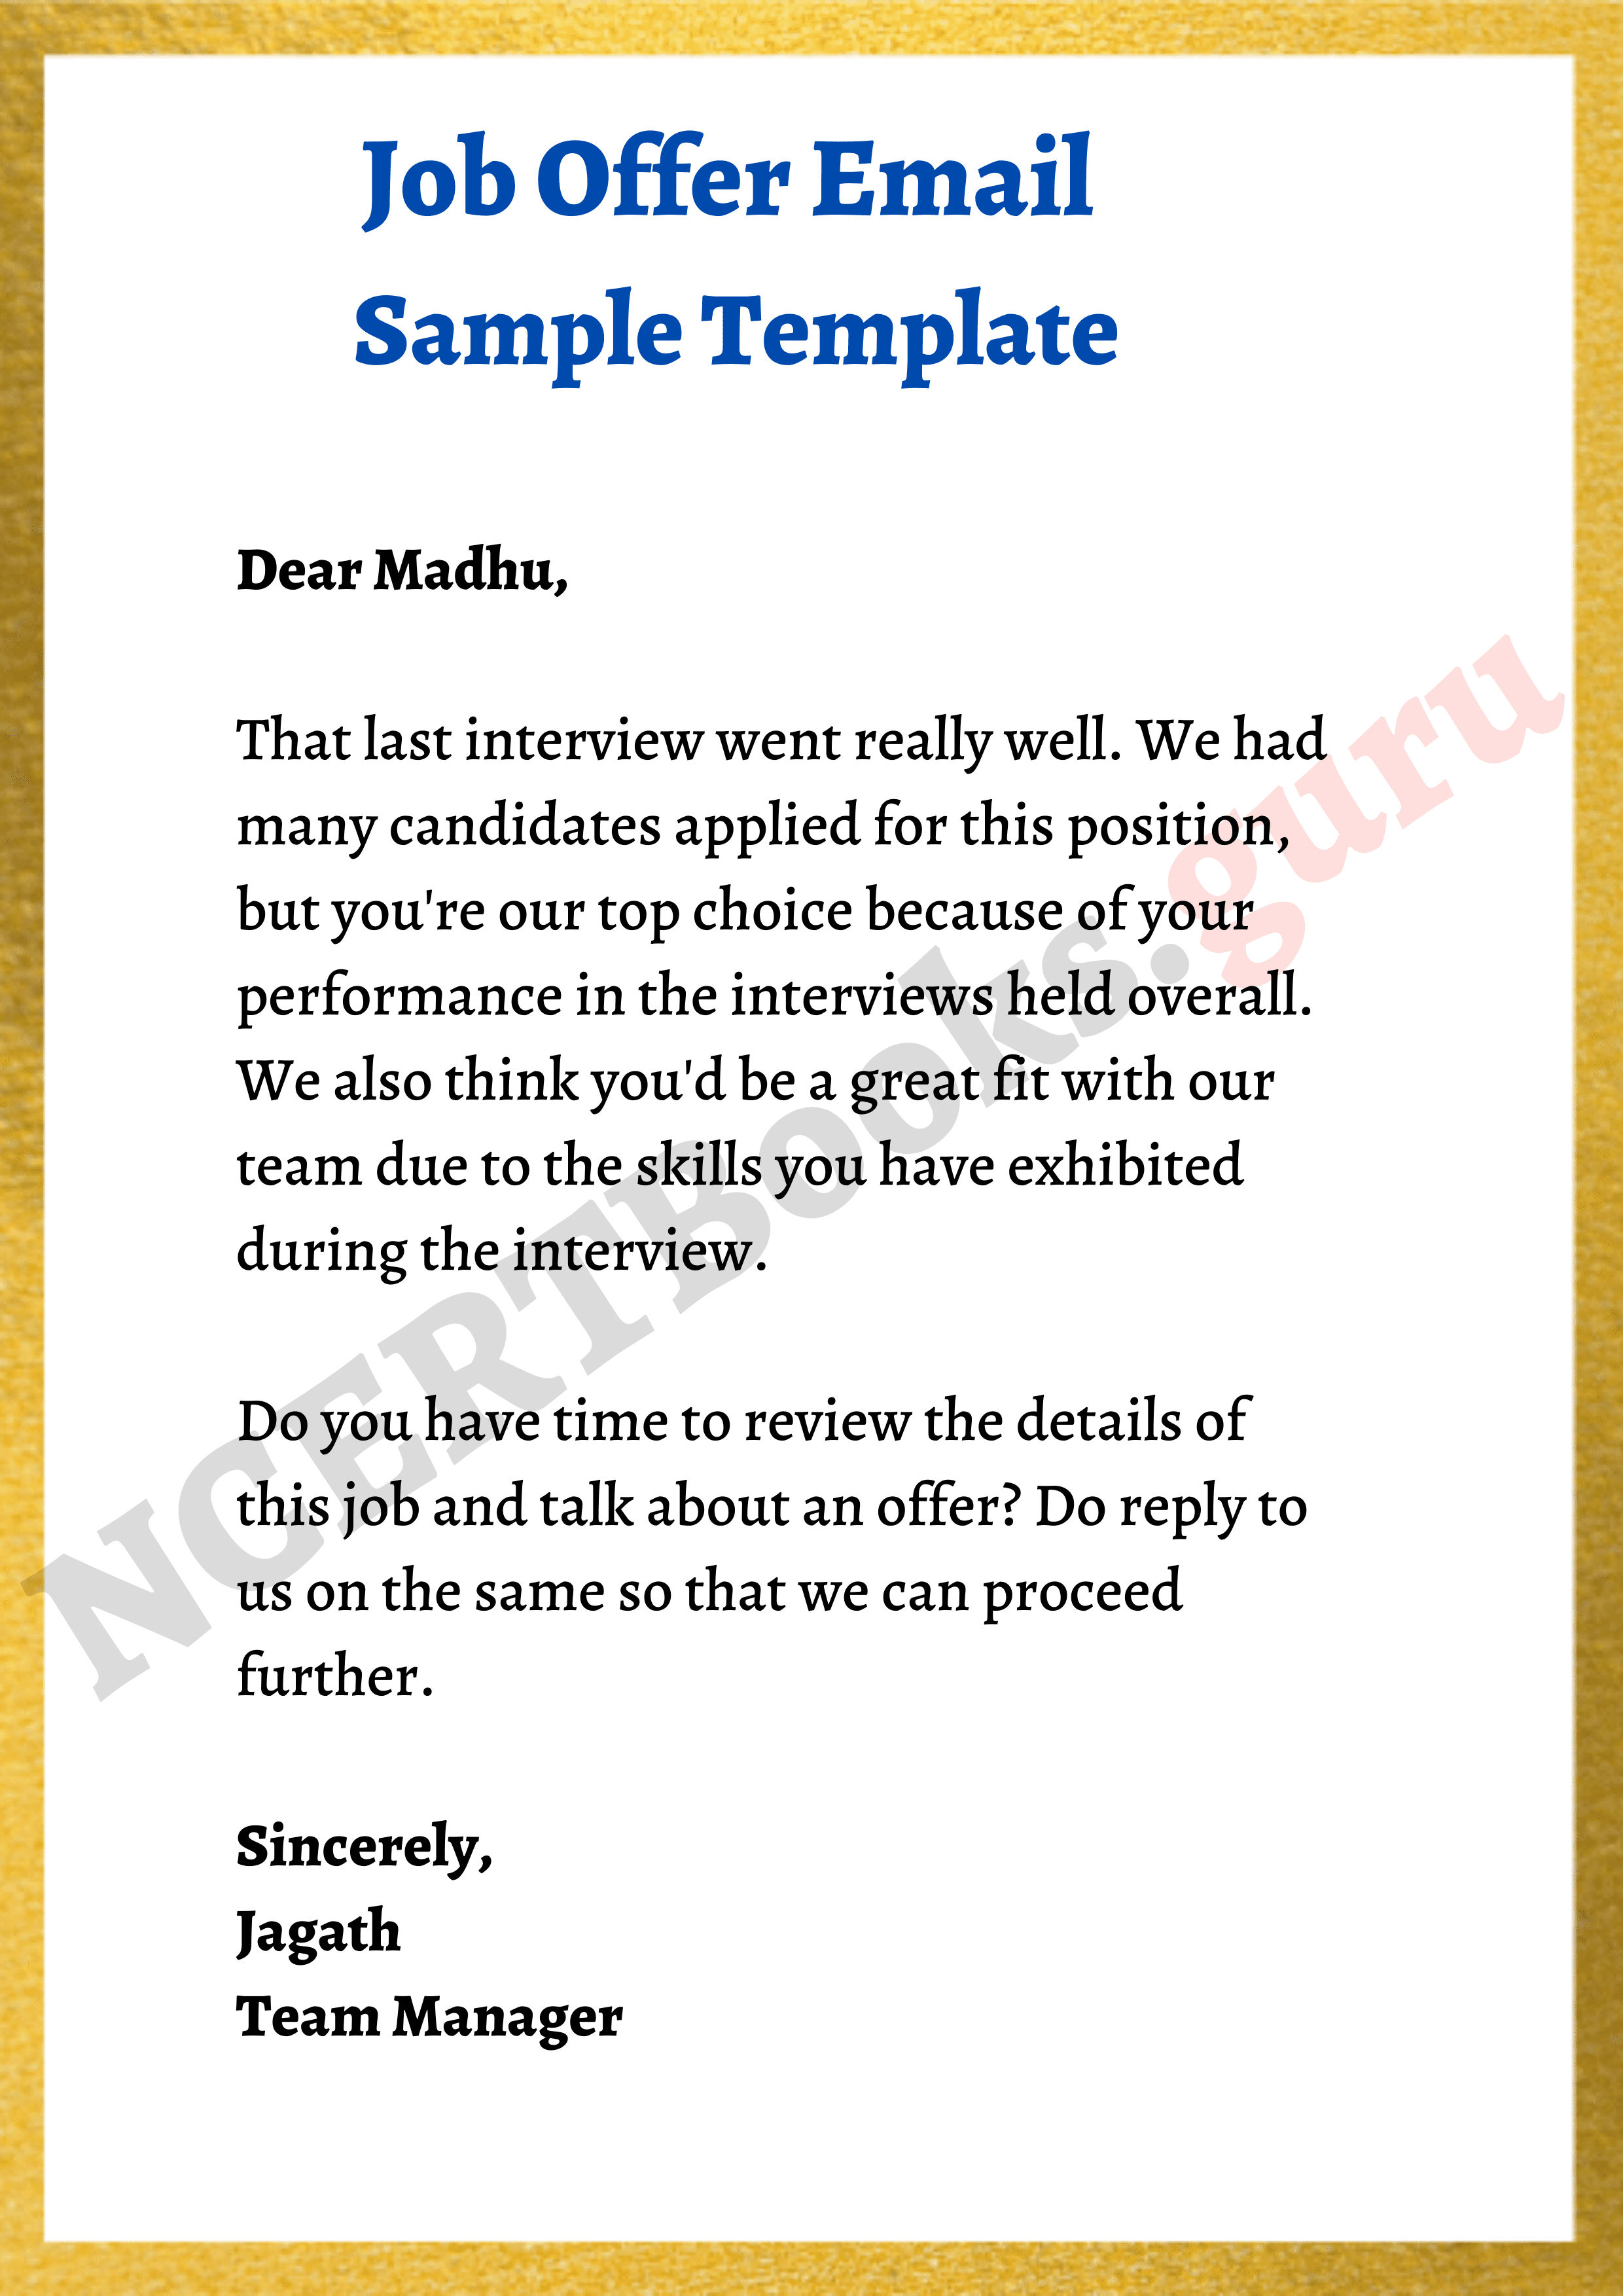 Sample Job Offer Email Template